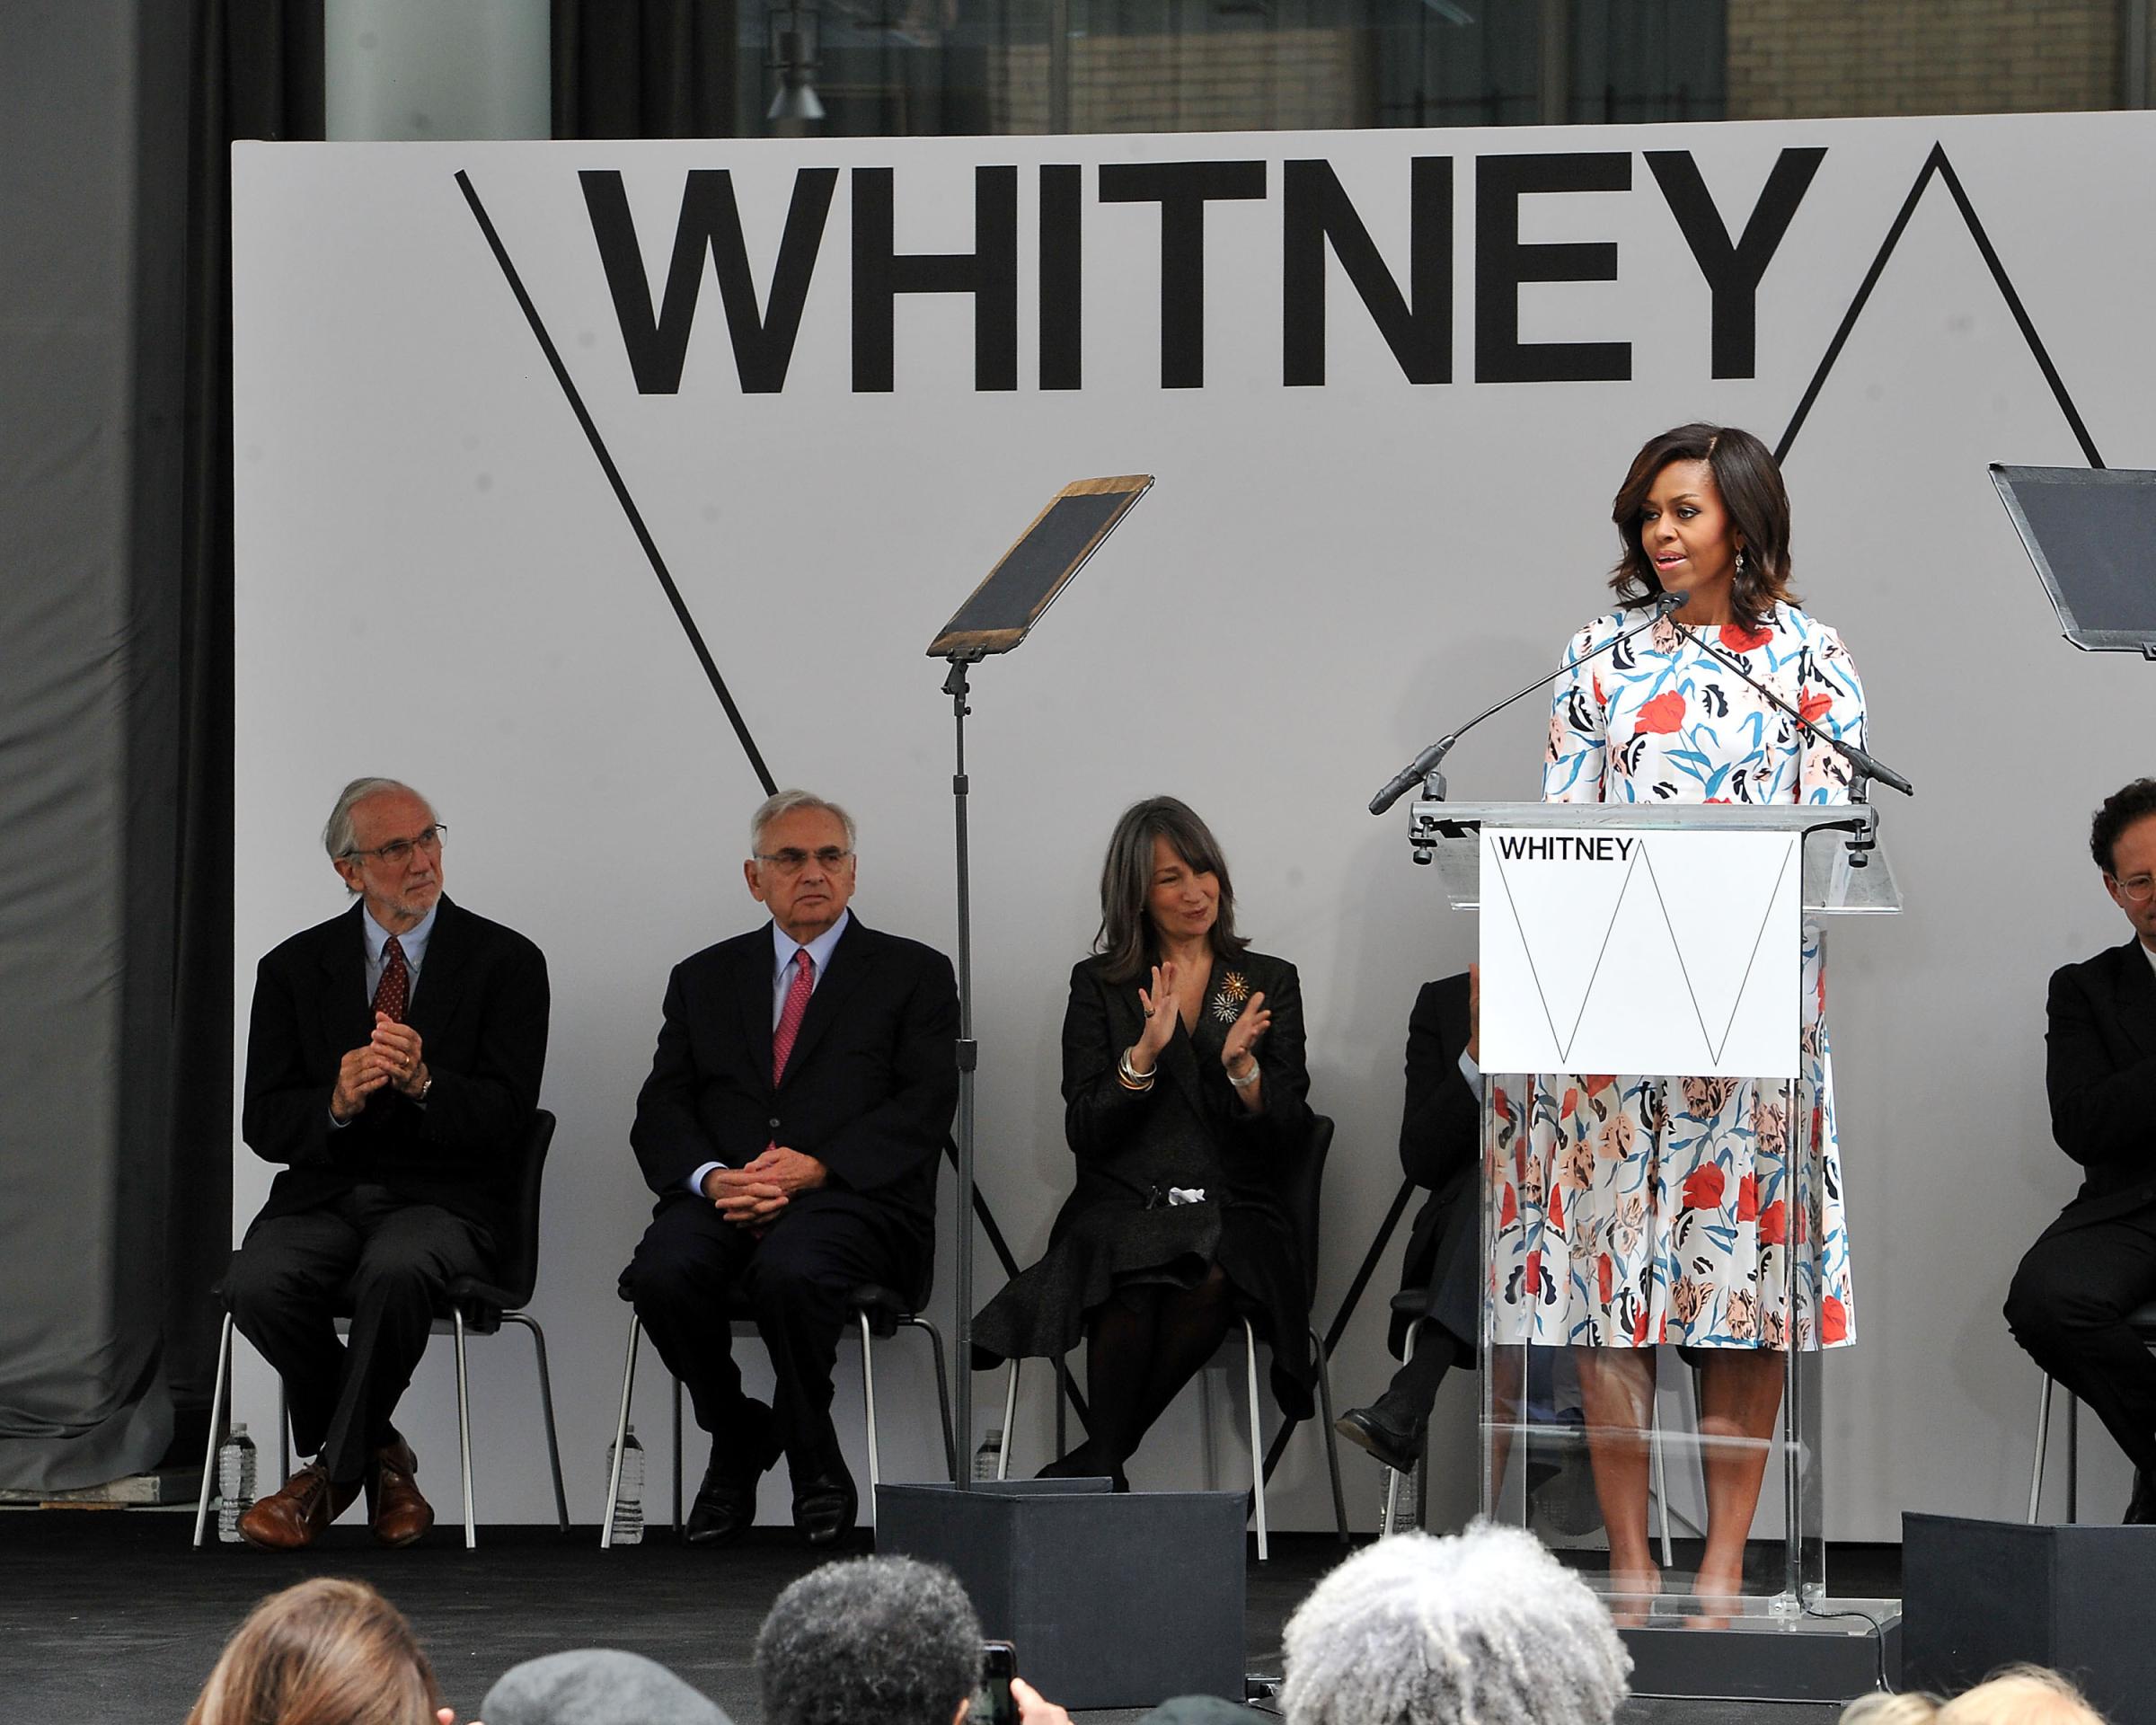 NEW YORK, NY - APRIL 30: (L-R) Renzo Piano, Neil Bluhm, Brooke Garber Neidich and First Lady Michelle Obama attend the Whitney Museum Of American Art Ribbon Cutting Ceremony at The Whitney Museum of American Art on April 30, 2015 in New York City. (Photo by Ben Gabbe/Getty Images)